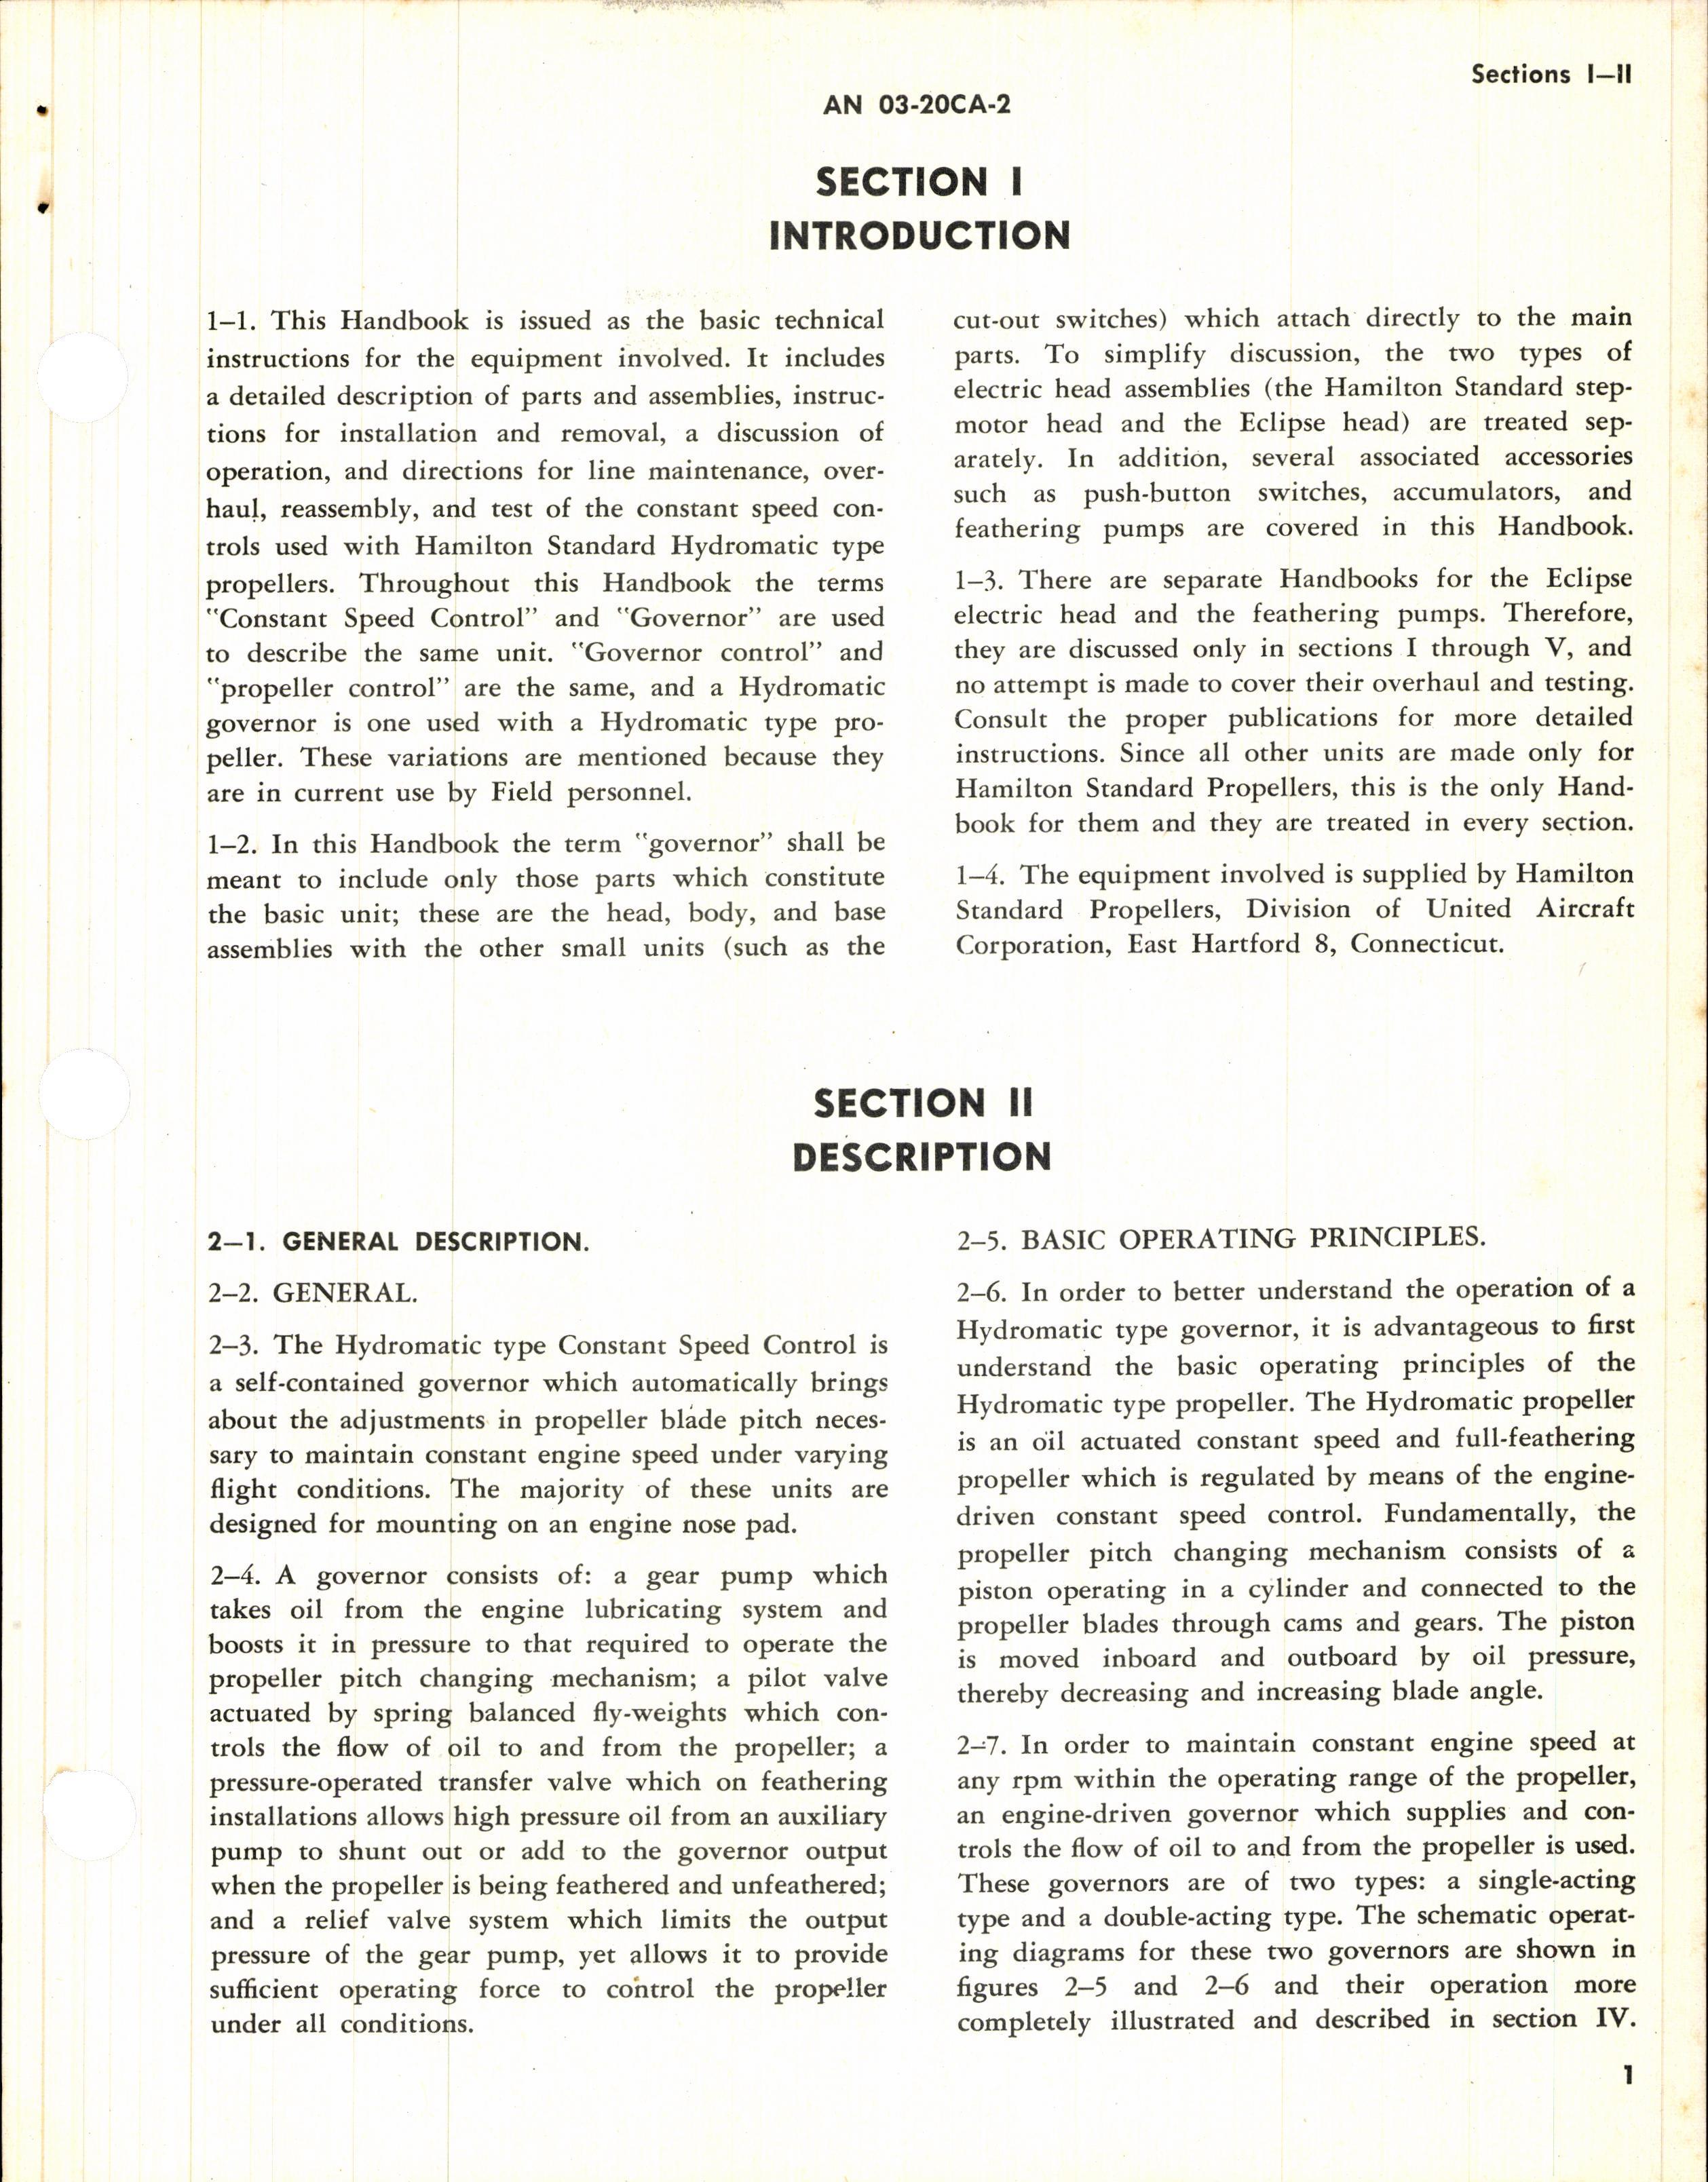 Sample page 5 from AirCorps Library document: Operation, Service, & Overhaul Instructions with Parts Catalog for Constant Speed and Hydromatic Propellers